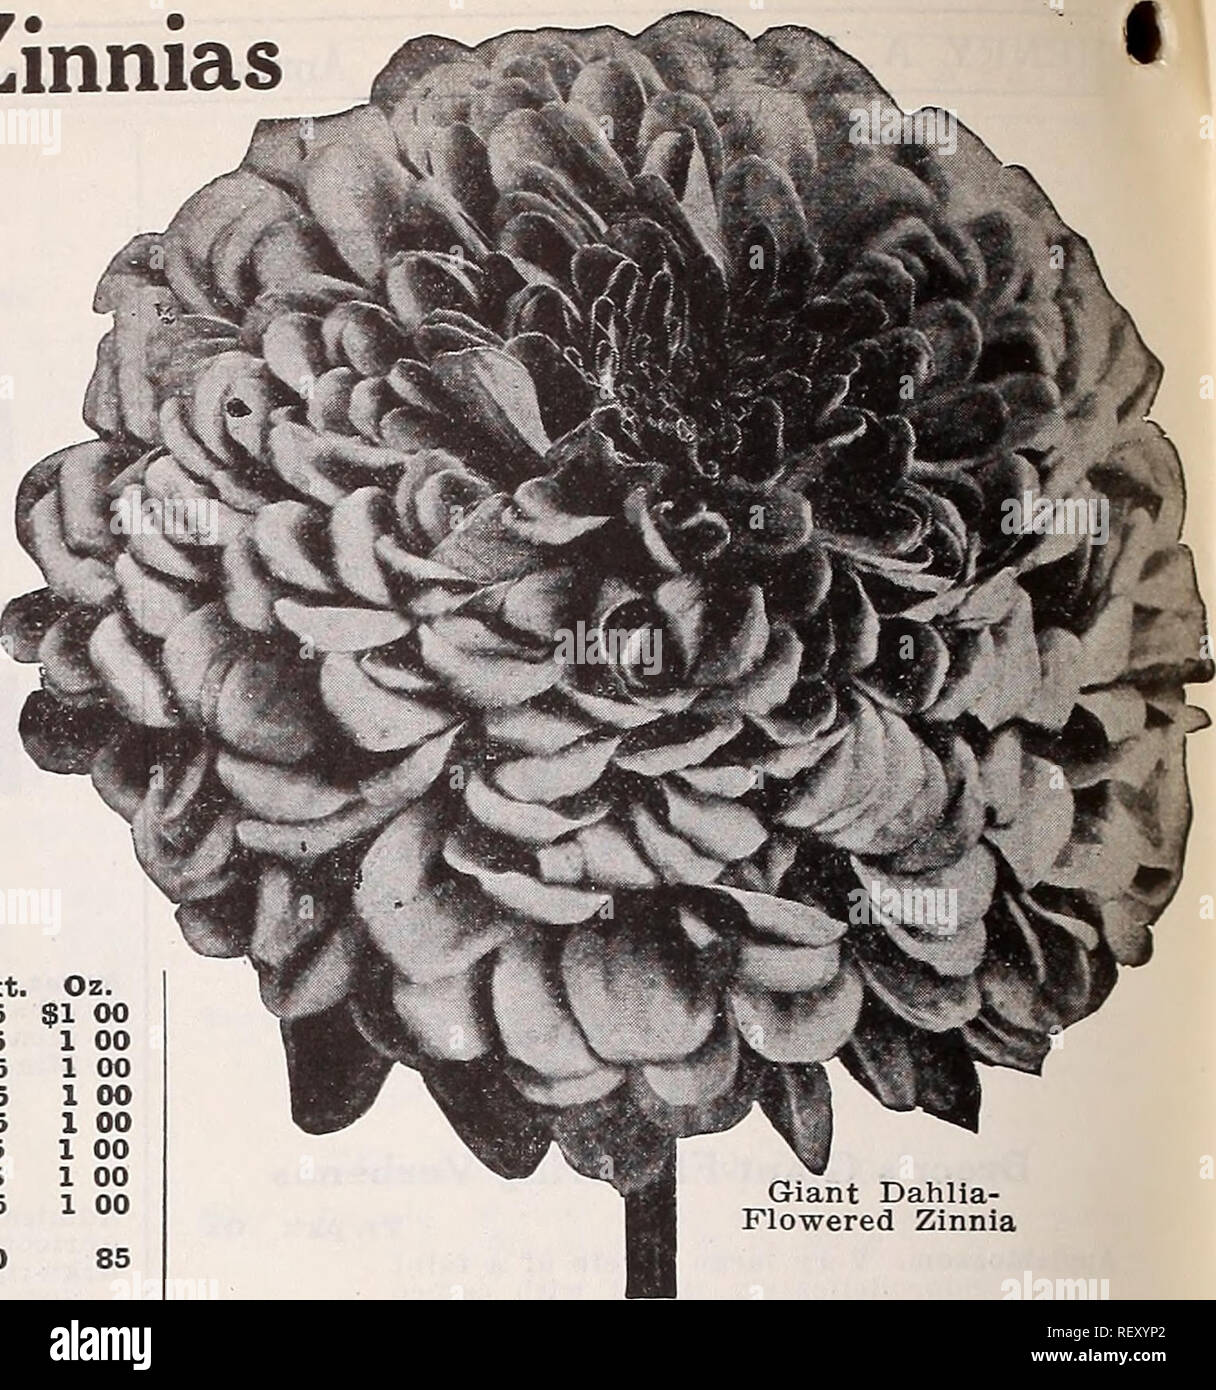 . Dreer's wholesale catalog for florists and market gardeners : 1940 winter spring summer. Bulbs (Plants) Catalogs; Vegetables Seeds Catalogs; Flowers Seeds Catalogs; Nurseries (Horticulture) Catalogs; Gardening Equipment and supplies Catalogs. Dreer's Superb Zinnias Giant Dahlia-Flowered Double Zinnias This wonderful type Is becoming better fixed each year. The flowers are of Immense size, In form like a Decorative Dahlia. Tr. pkt Oz. Canary Bird. Canary yellow...$0 25 $1 00 Crimson Uonarch. Crimson .... 25 1 00 Dream. Deep lavender 25 1 00 Exquisite. Rich rose-pink 25 1 00 Golden State. Gold Stock Photo